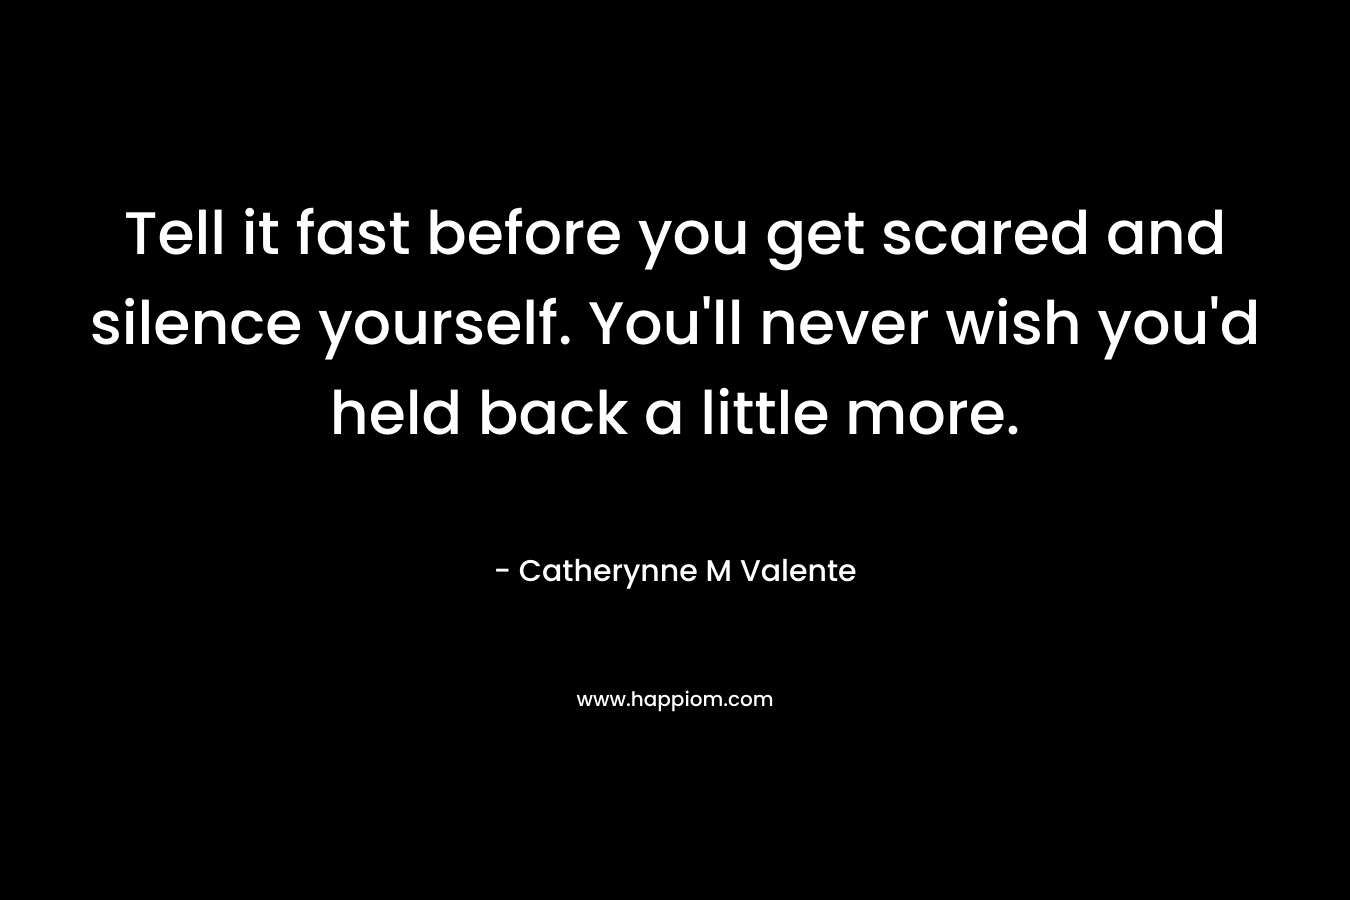 Tell it fast before you get scared and silence yourself. You’ll never wish you’d held back a little more. – Catherynne M Valente